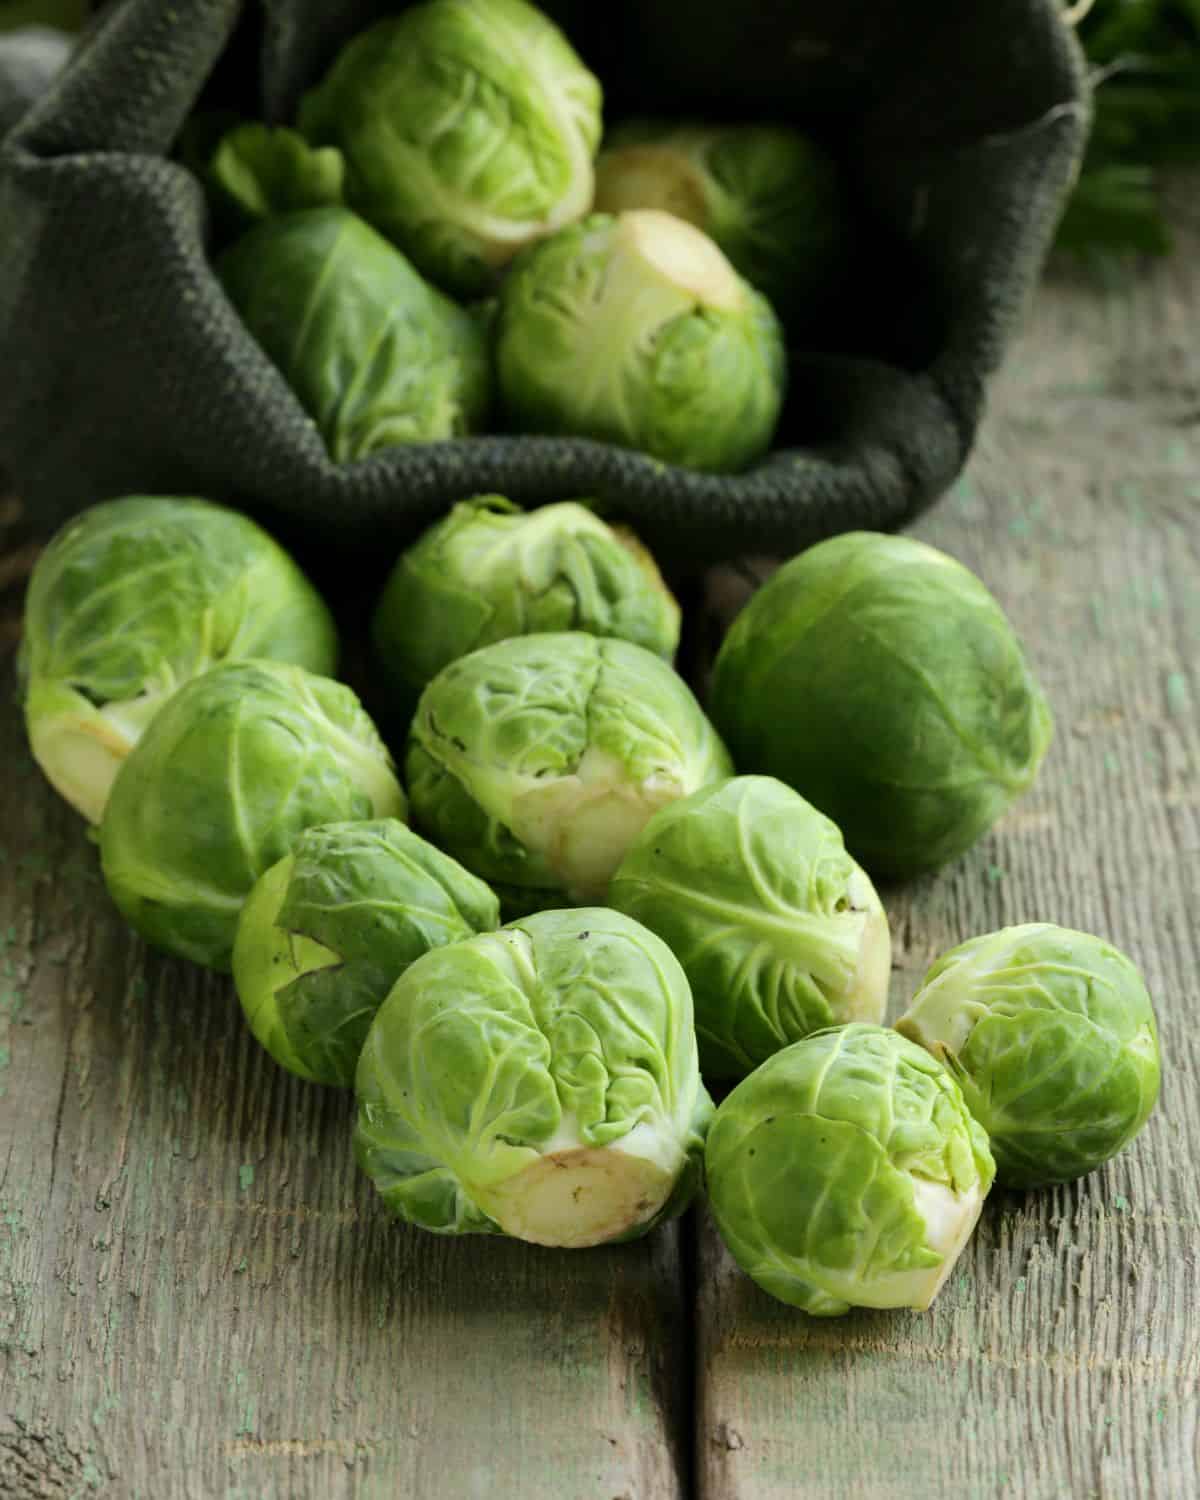 Fresh brussels sprouts in a green burlap bag, used as a substitute for asparagus.